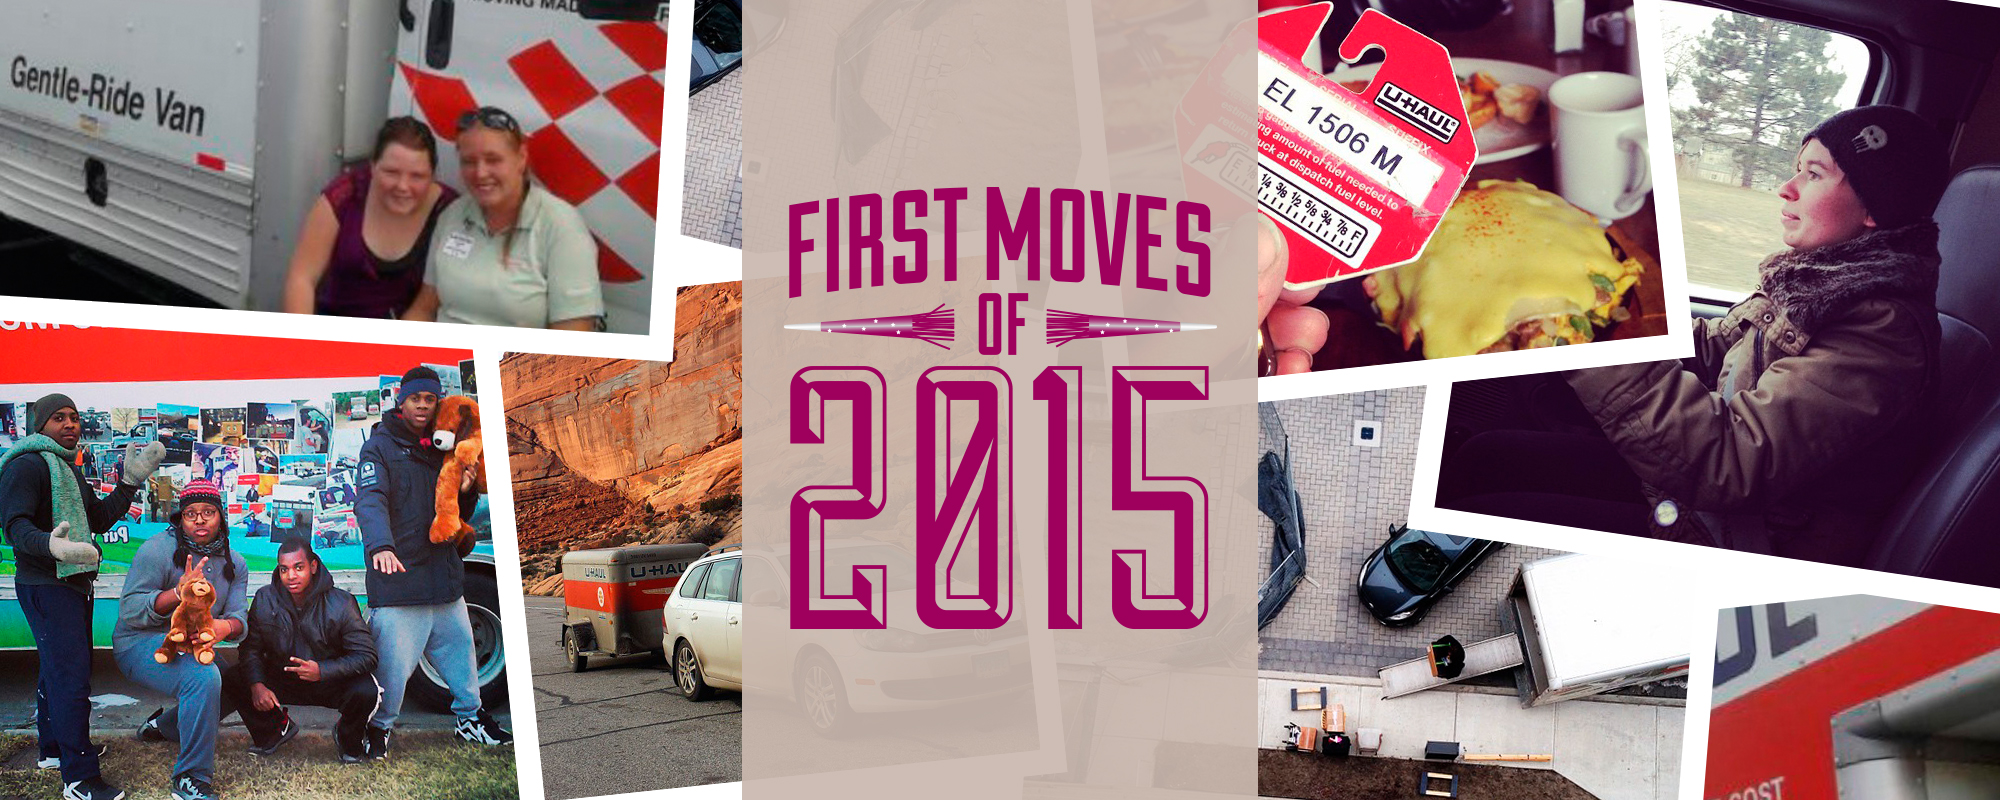 First Moves of 2015!